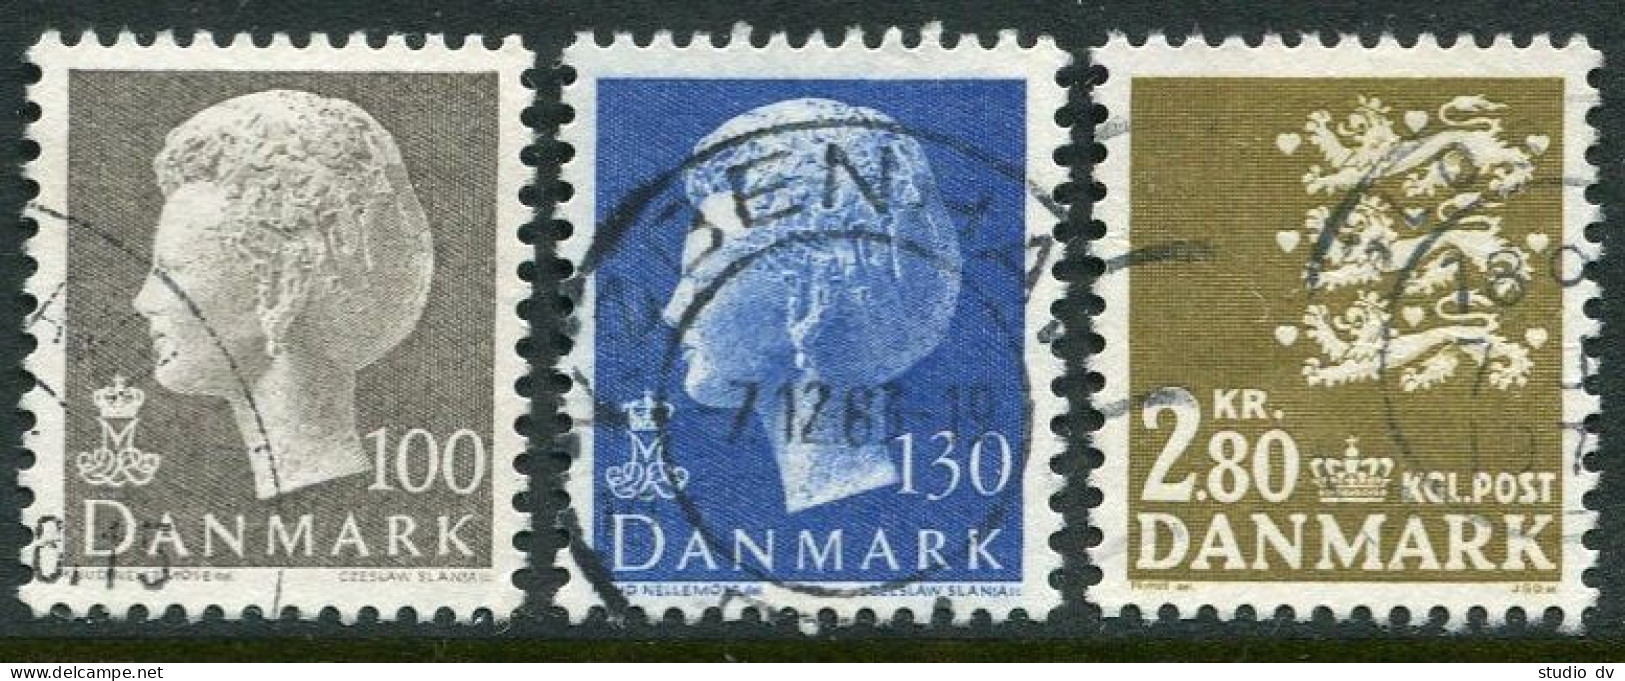 Denmark 500, 542, 548, Used. Definitive 1975. Small State Seal Queen Margrethe, - Usado